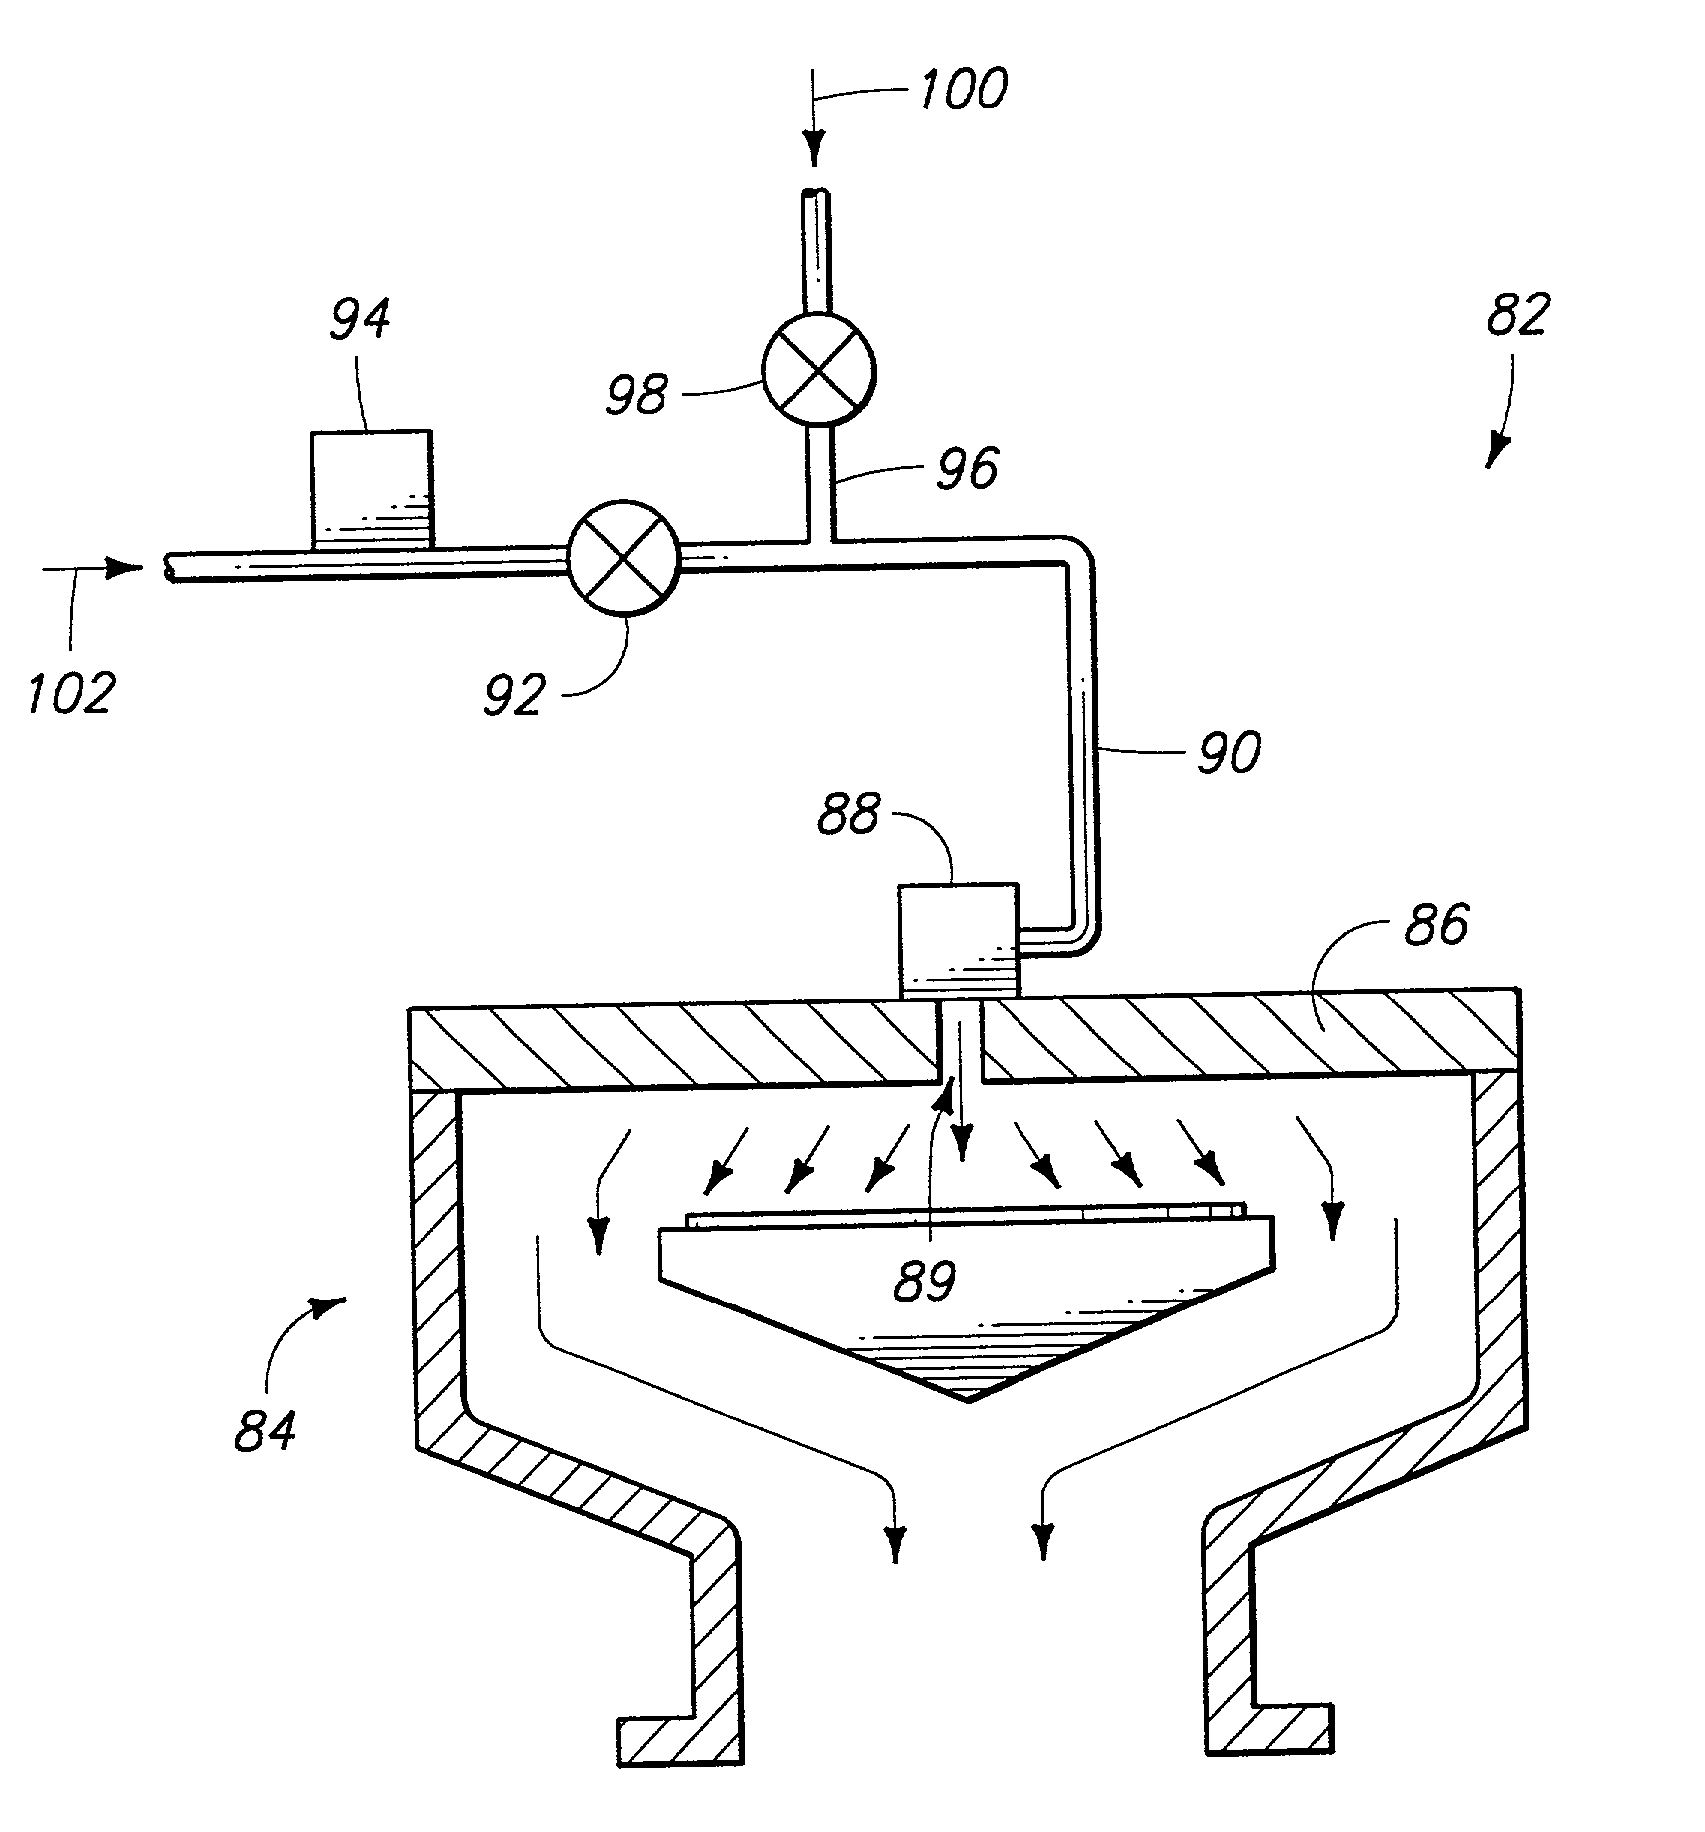 Chemical vapor deposition apparatuses and deposition methods